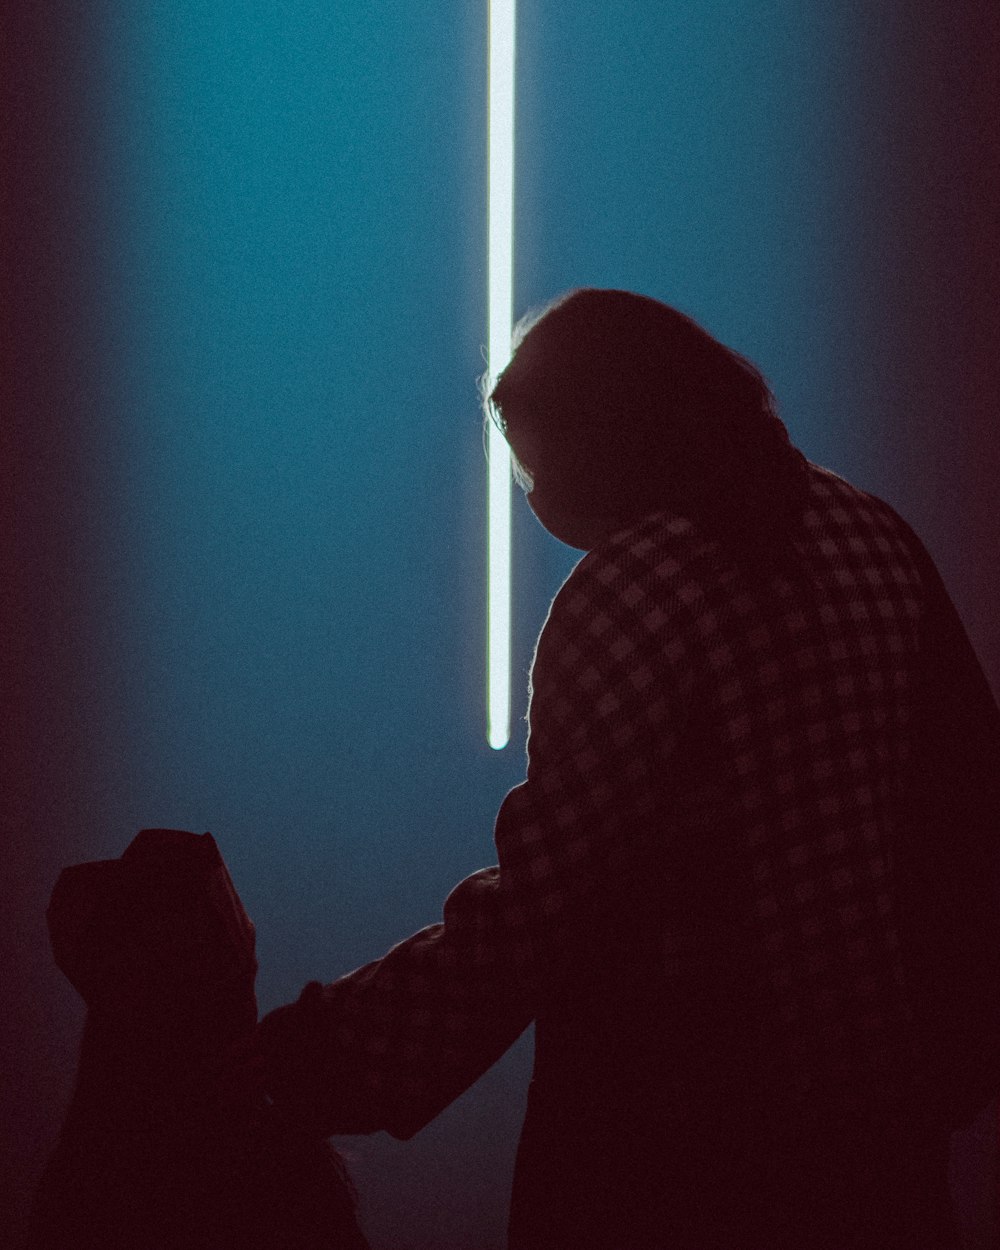 A man standing in front of a blue light photo – Free Light Image on Unsplash